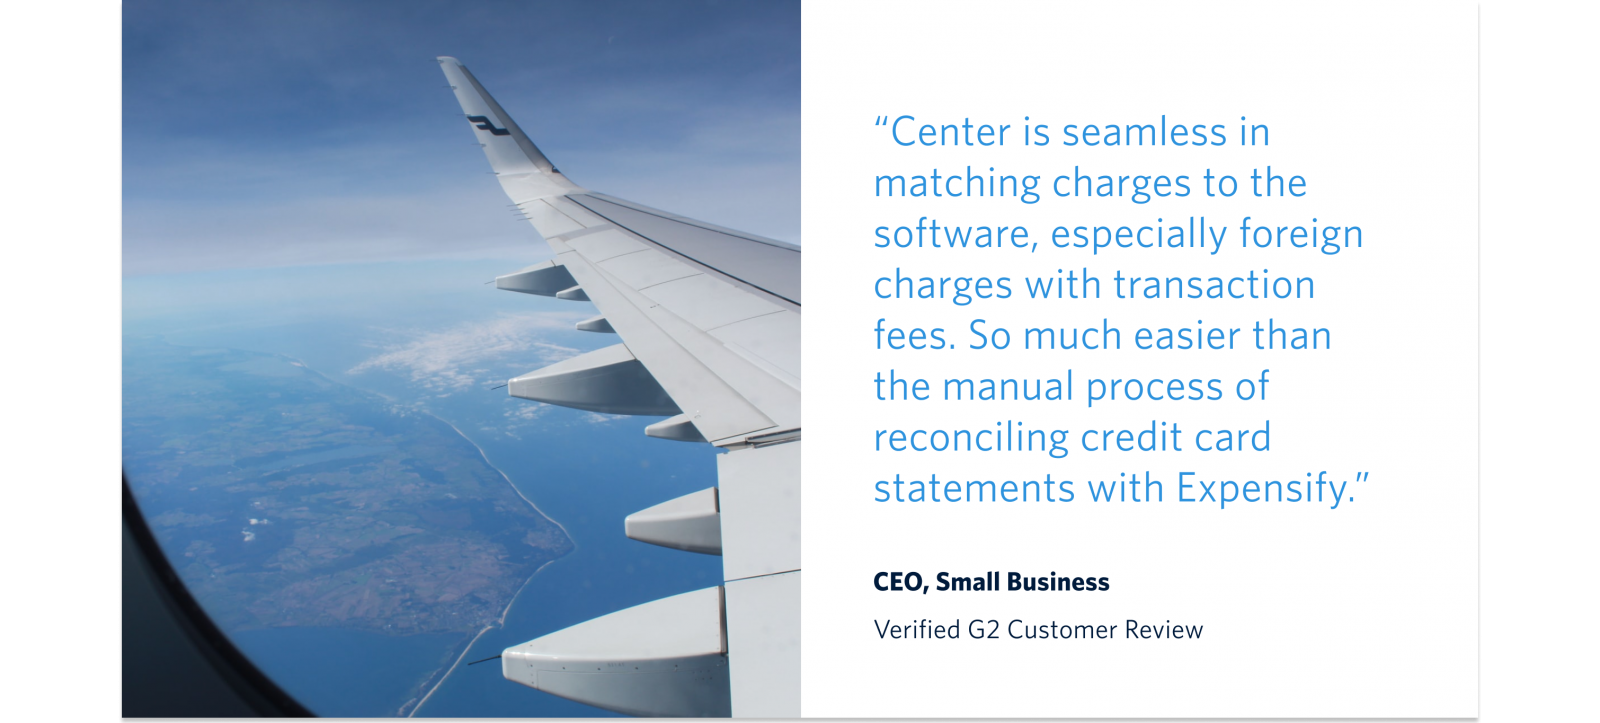 A G2 Customer Review of Center for Business Travel Expenses